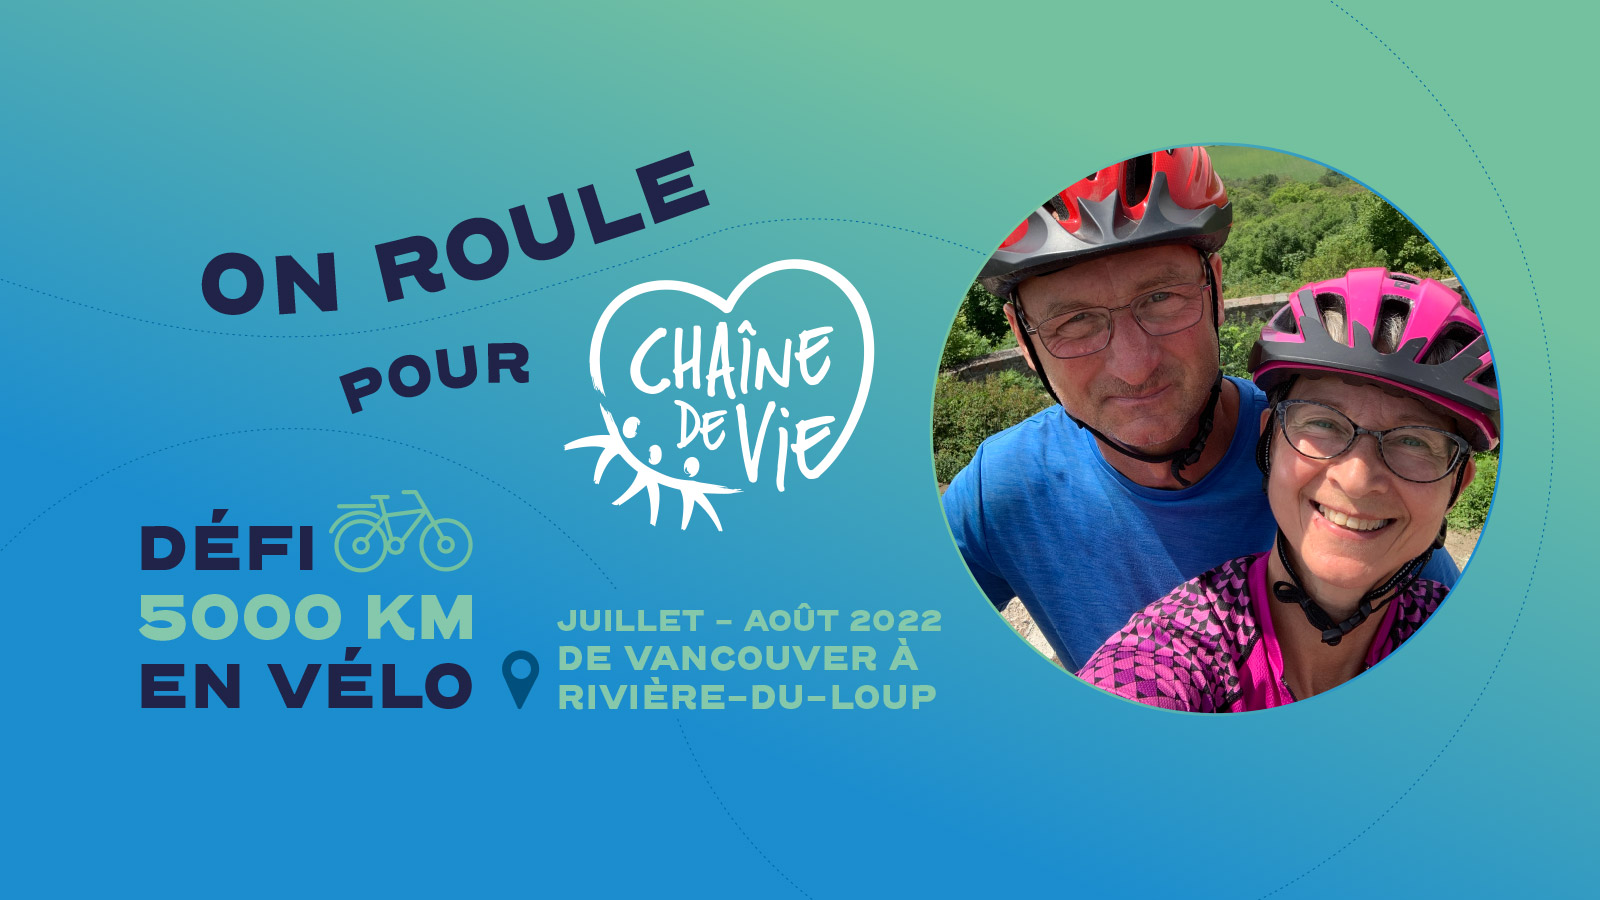 From Vancouver to Rivière-du-Loup, over 5,000 km for Chain of Life!